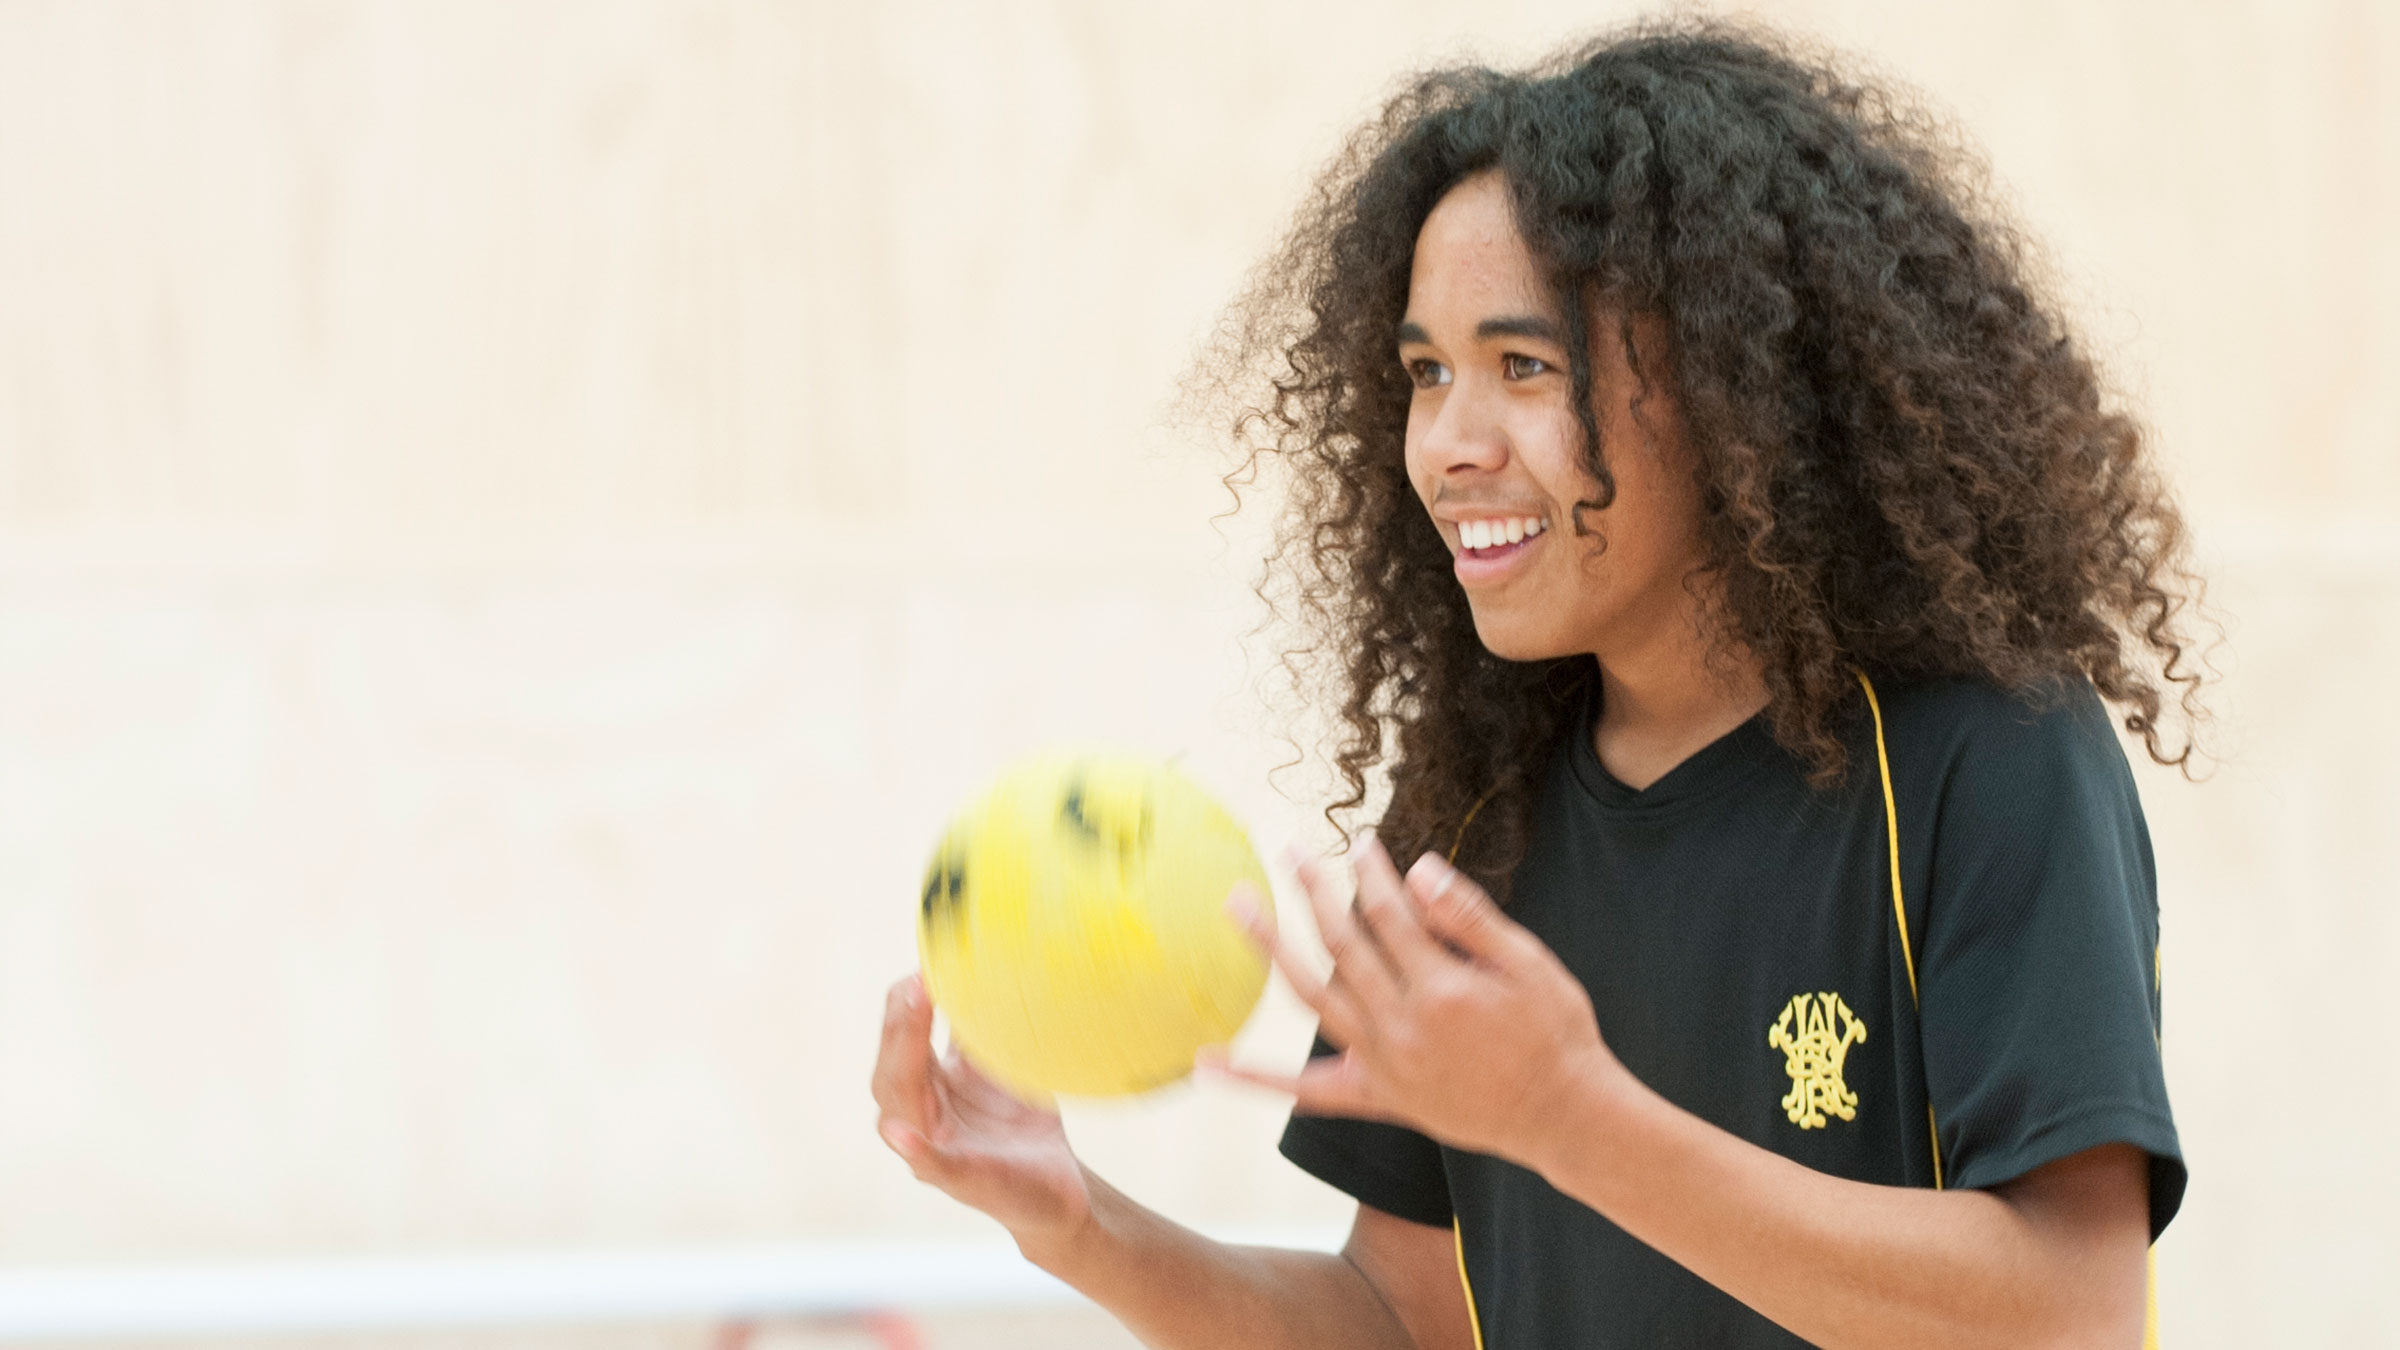 A teenager tossing a yellow ball and smiling